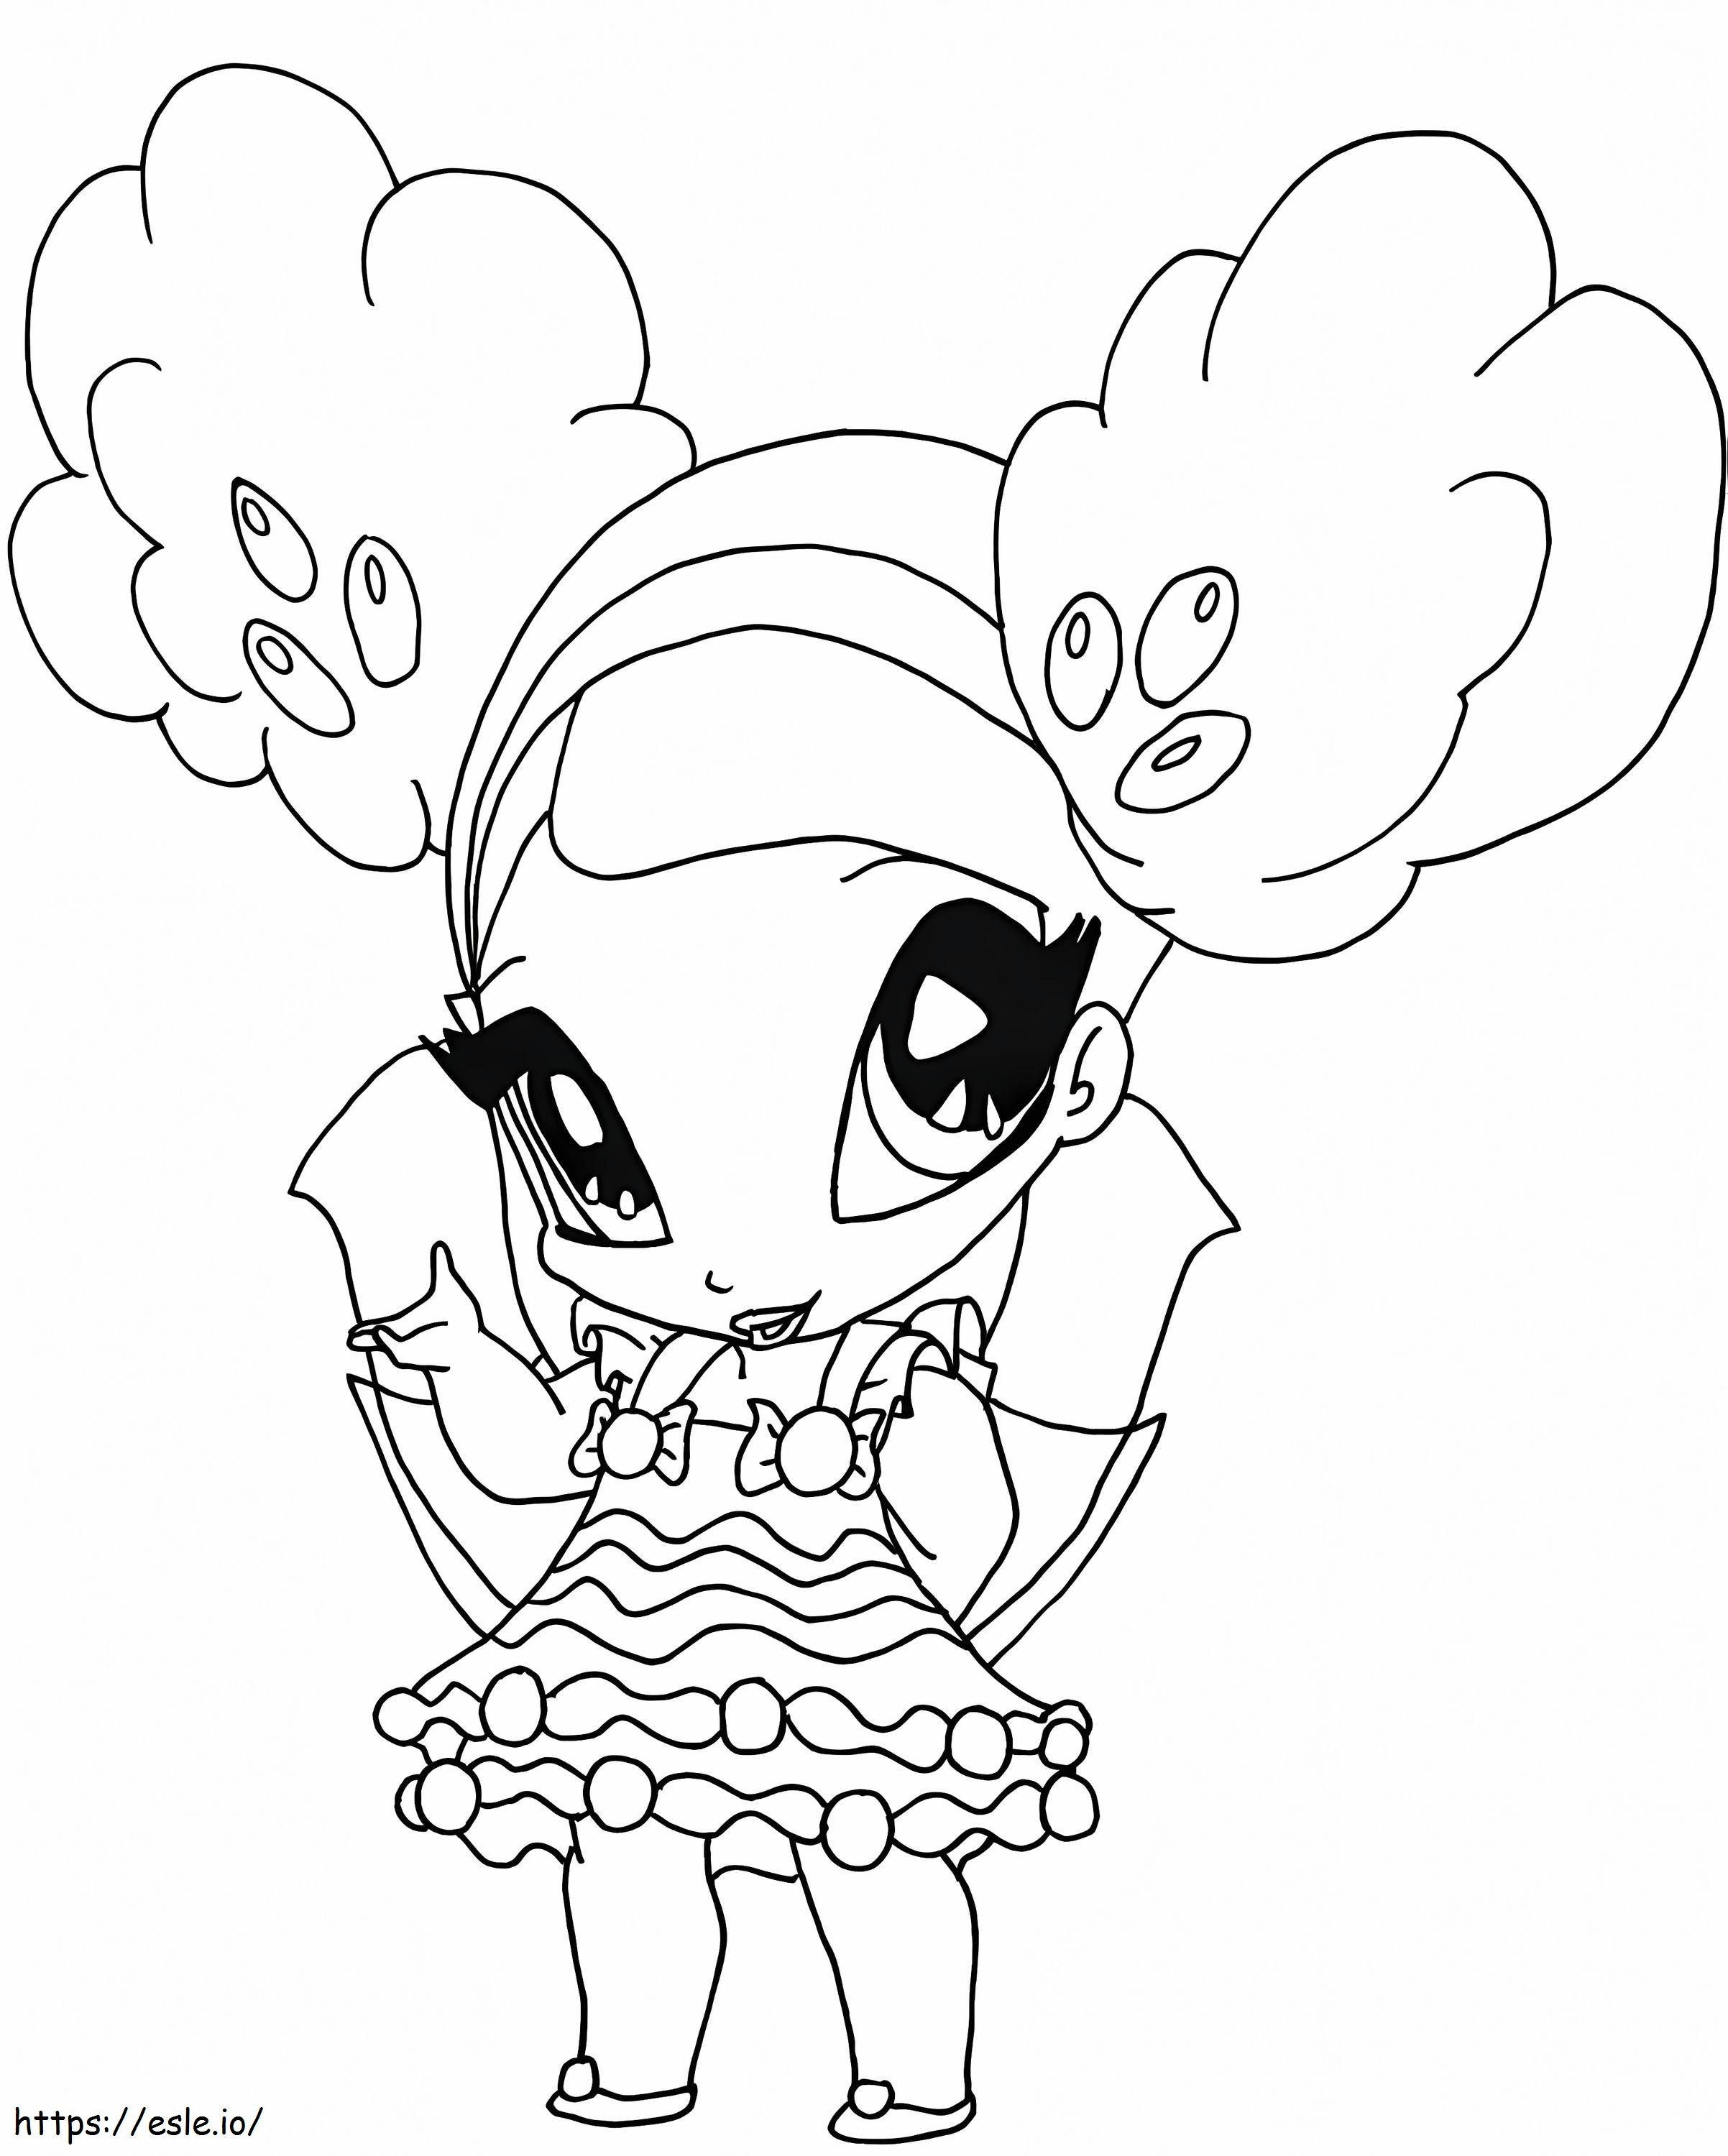 Winx Club Caramel Pixie coloring page